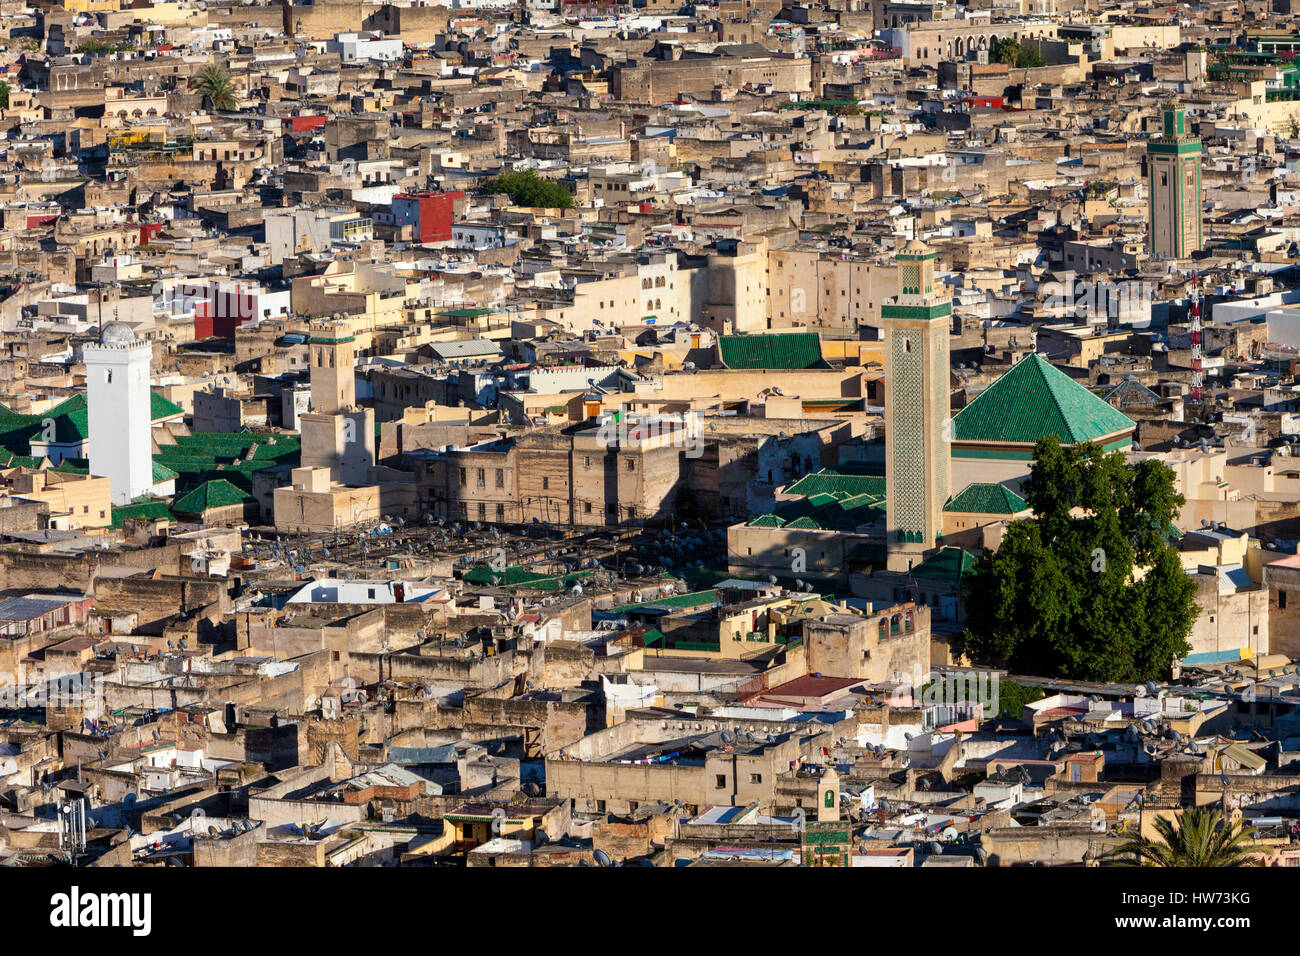 Fes, Morocco.  Old City (Fes El-Bali), Kairaouine Mosque (on left, with white minaret), Zawiya of Moulay Idris (center, with tiled minaret). Stock Photo